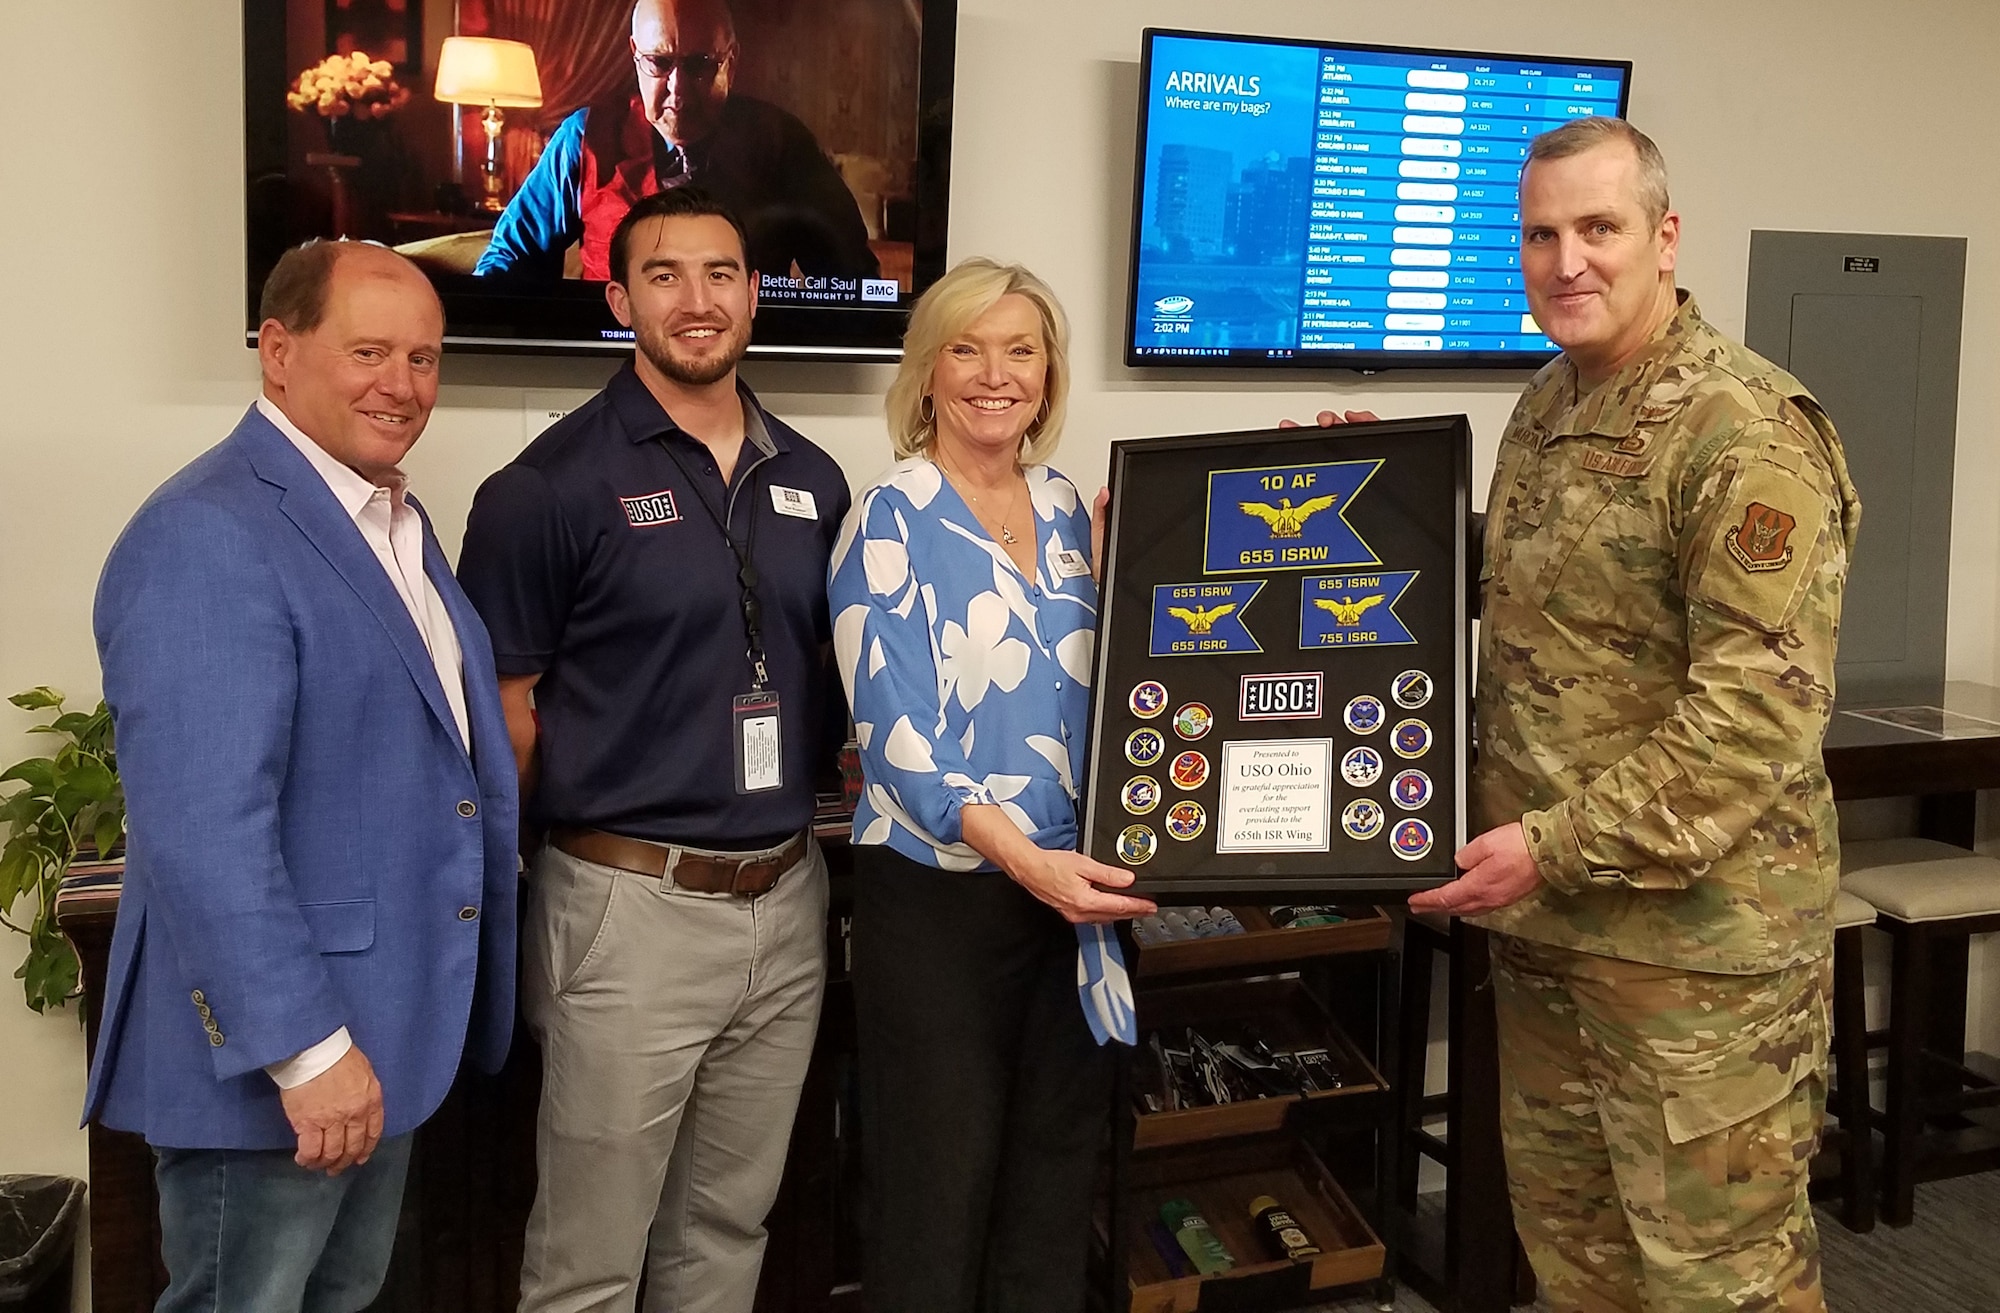 Col. Joseph Marcinek, 655th Intelligence, Surveillance and Reconnaissance (ISR) Wing commander, presents a token of appreciation to the United Service Organizations (USO) Ohio at the USO Dayton-Vandalia Lounge inside the Dayton International Airport April 18, 2022. On hand to accept the gift was USO Ohio Executive Director Sherry Ems. Ems had the USO airport lounge manager, Matt Bradshaw, and USO Ohio board member, Kevin Duffin, accept the gift with her.